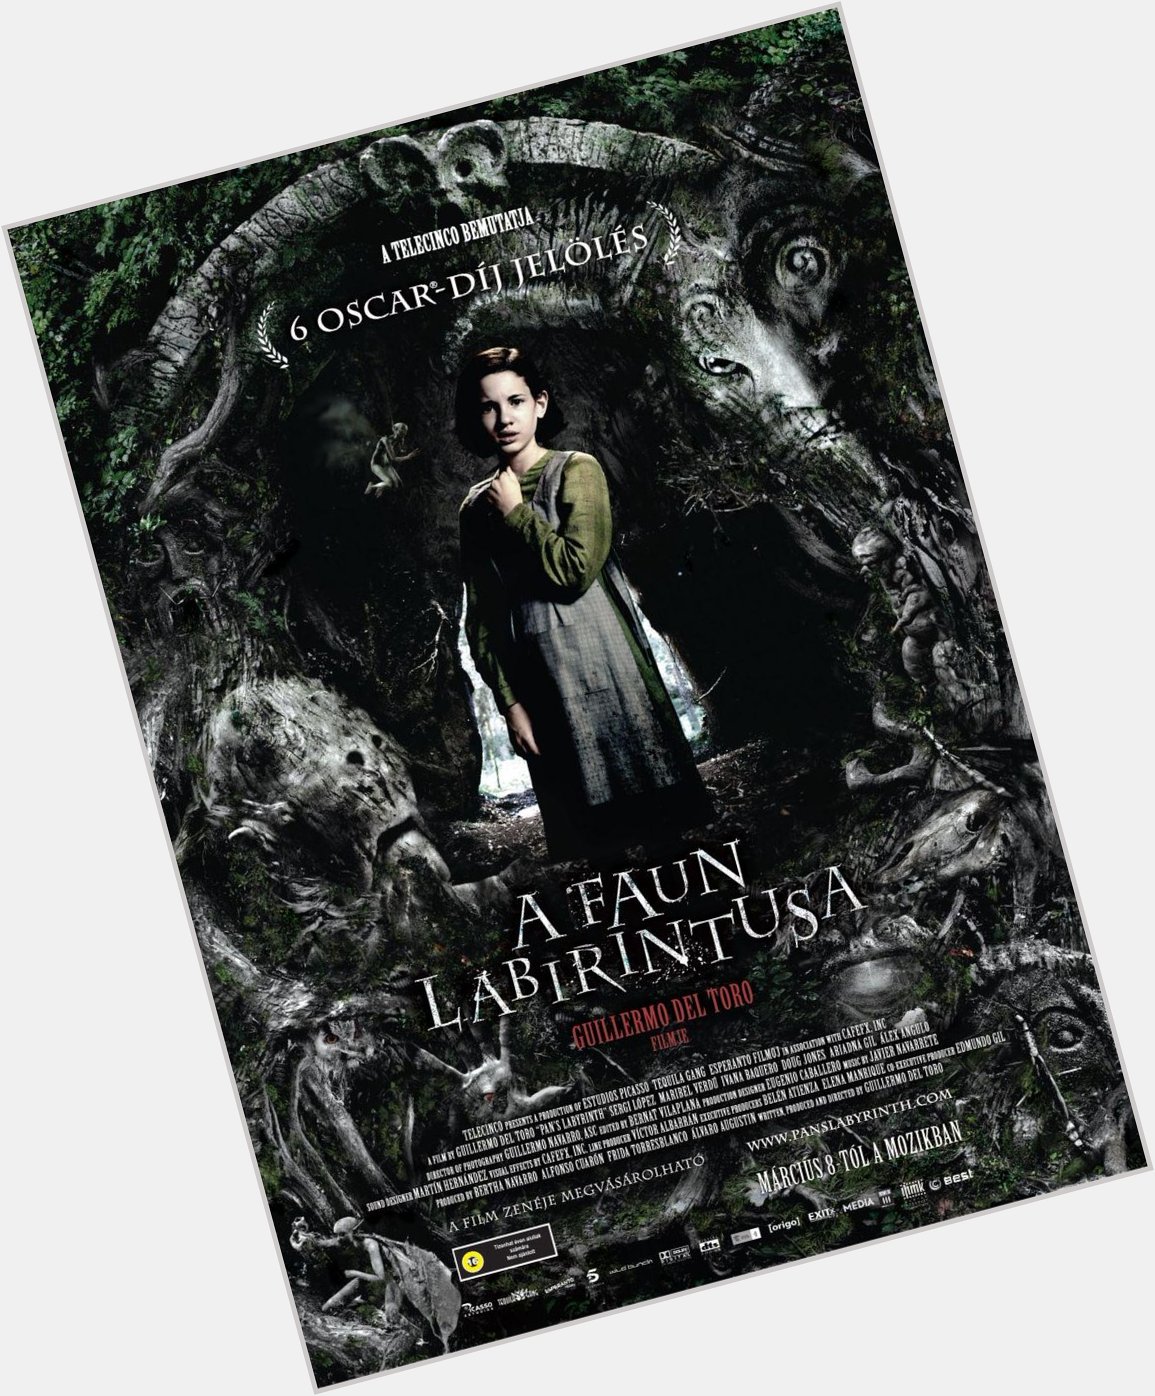 Happy Birthday Guillermo del Toro! PAN\S LABYRINTH - Spanish release poster 